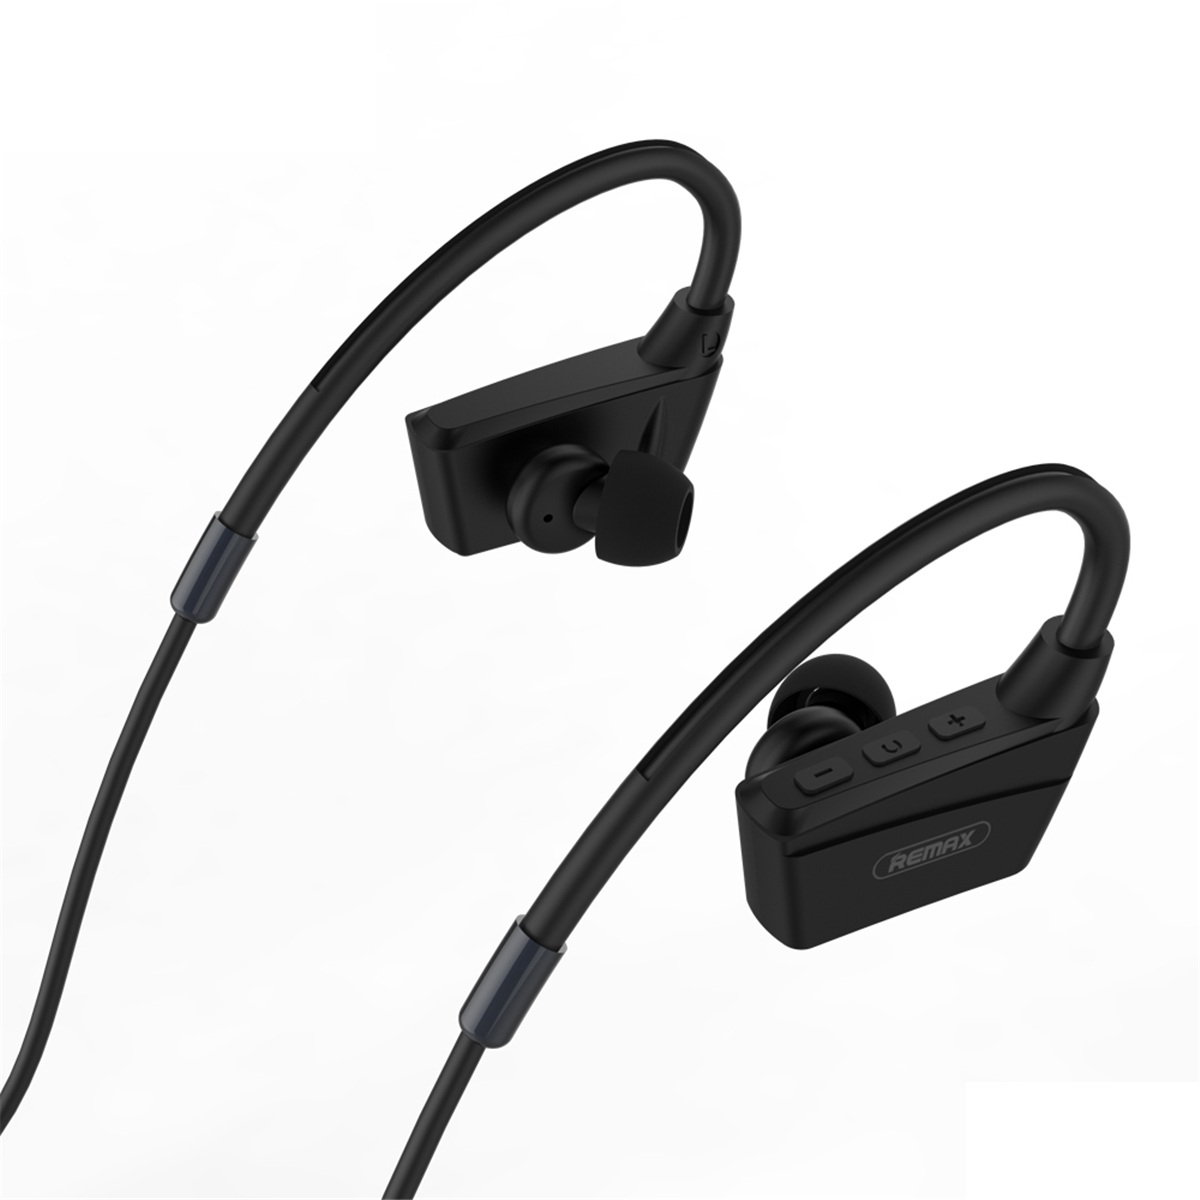 

Remax Portable Wireless bluetooth Earphone Stereo Headsets Sports Headphones with Mic